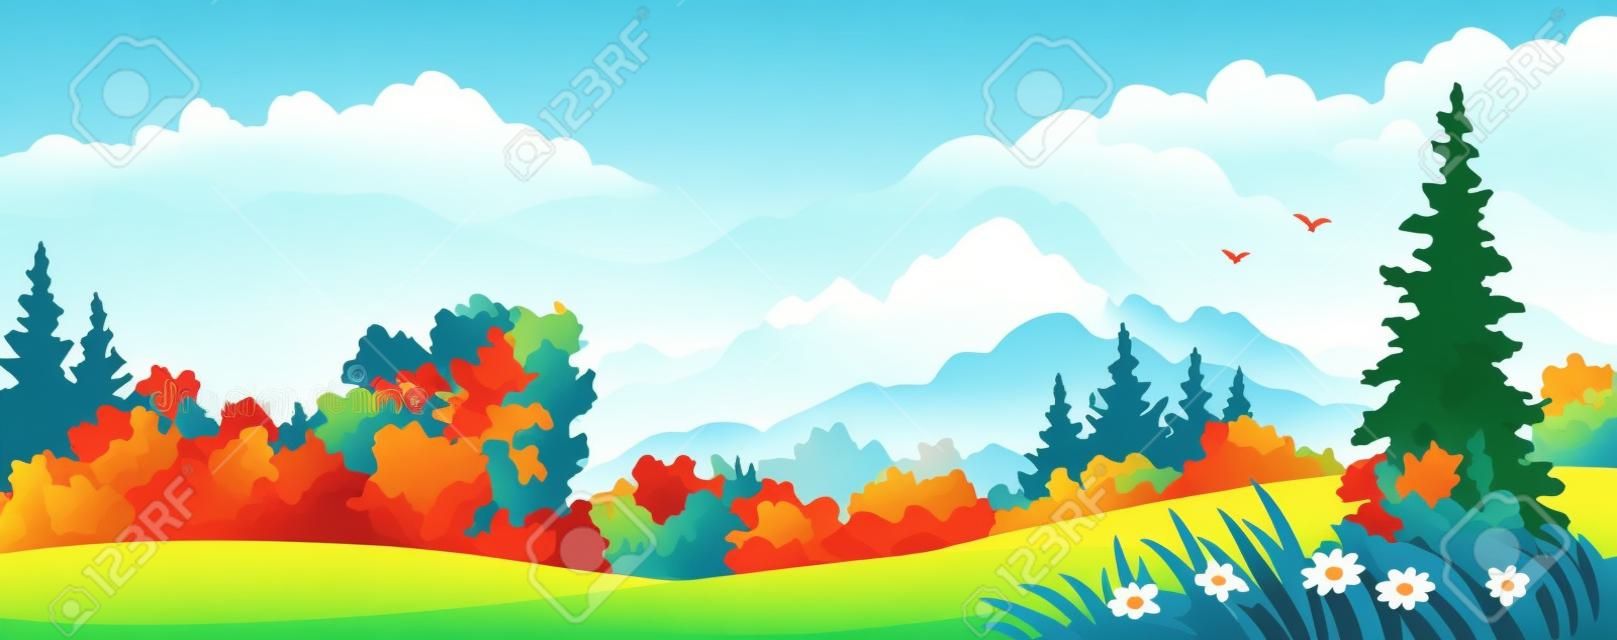 Vector illustration of a beautiful forest on the mountains 